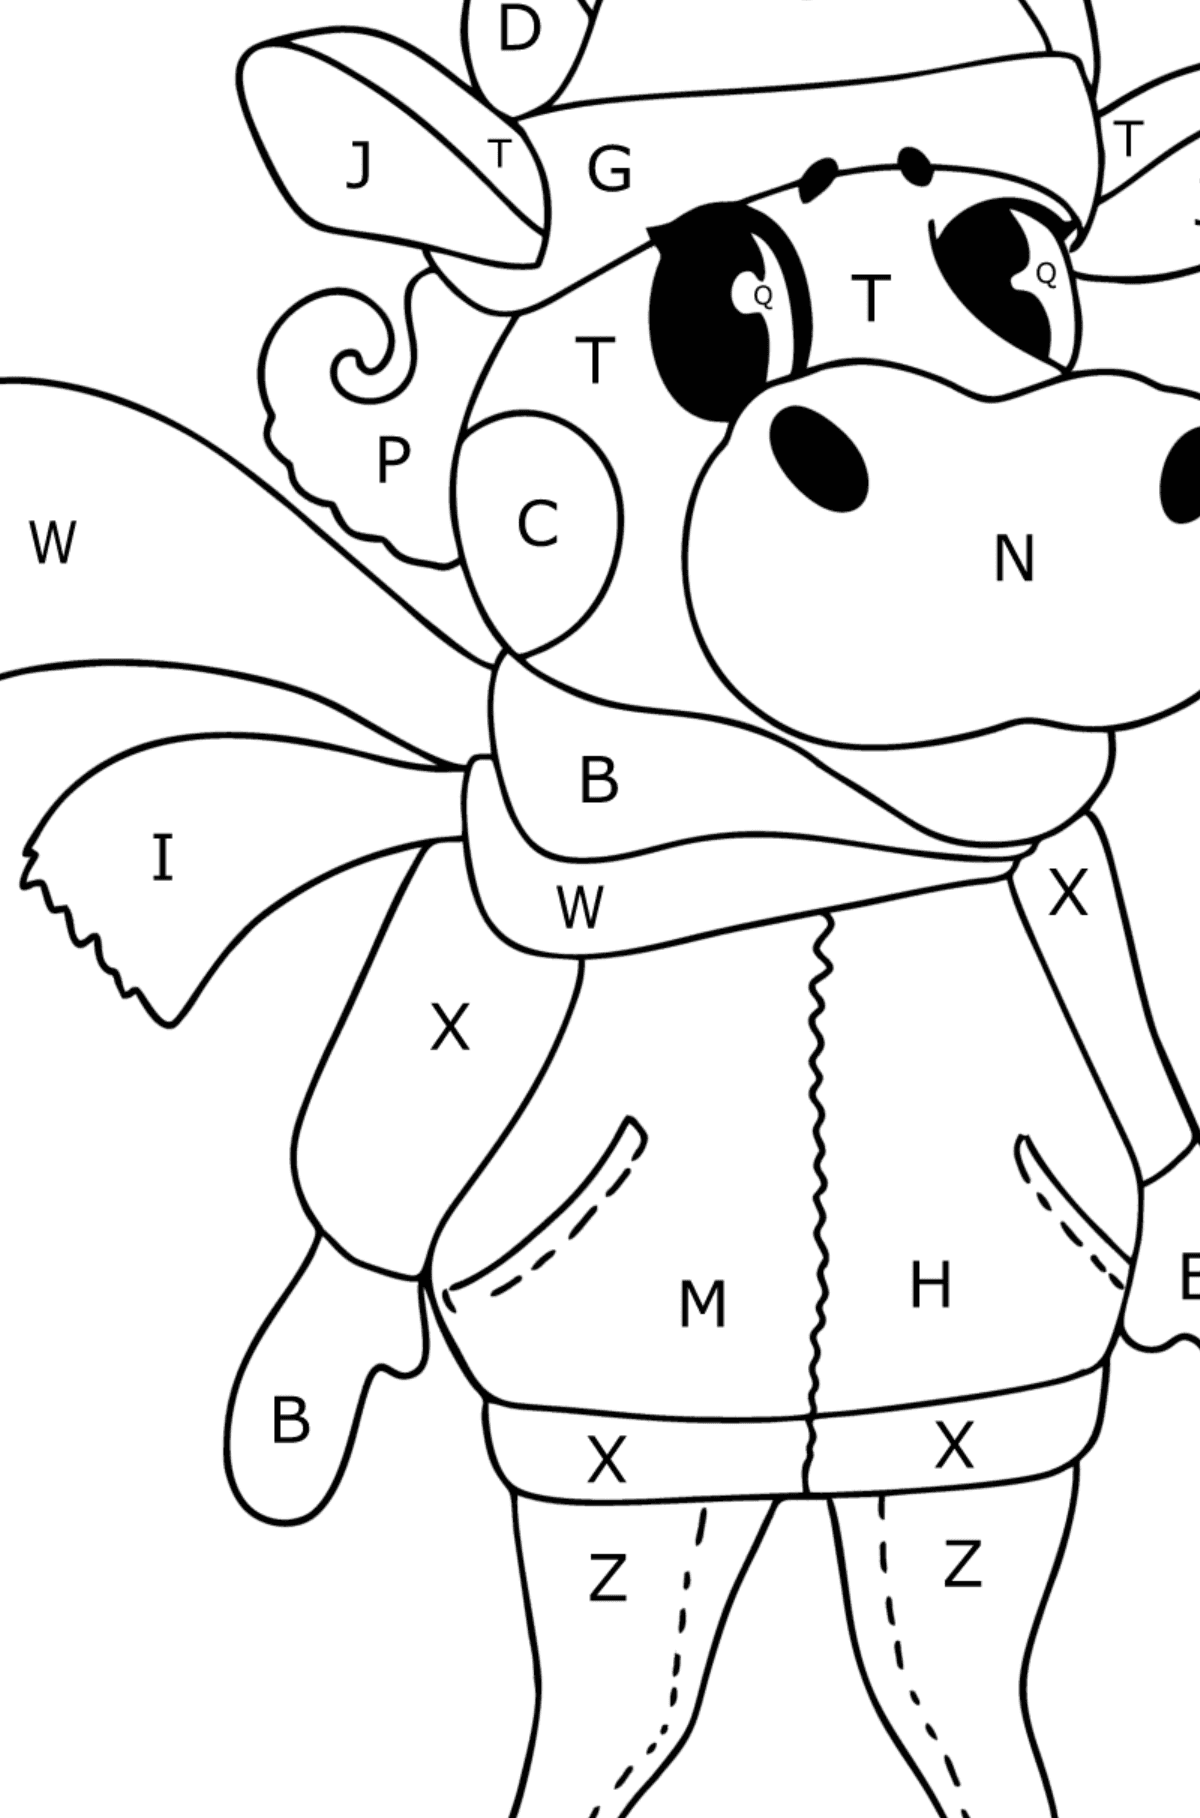 Kawaii cow coloring page - Coloring by Letters for Kids